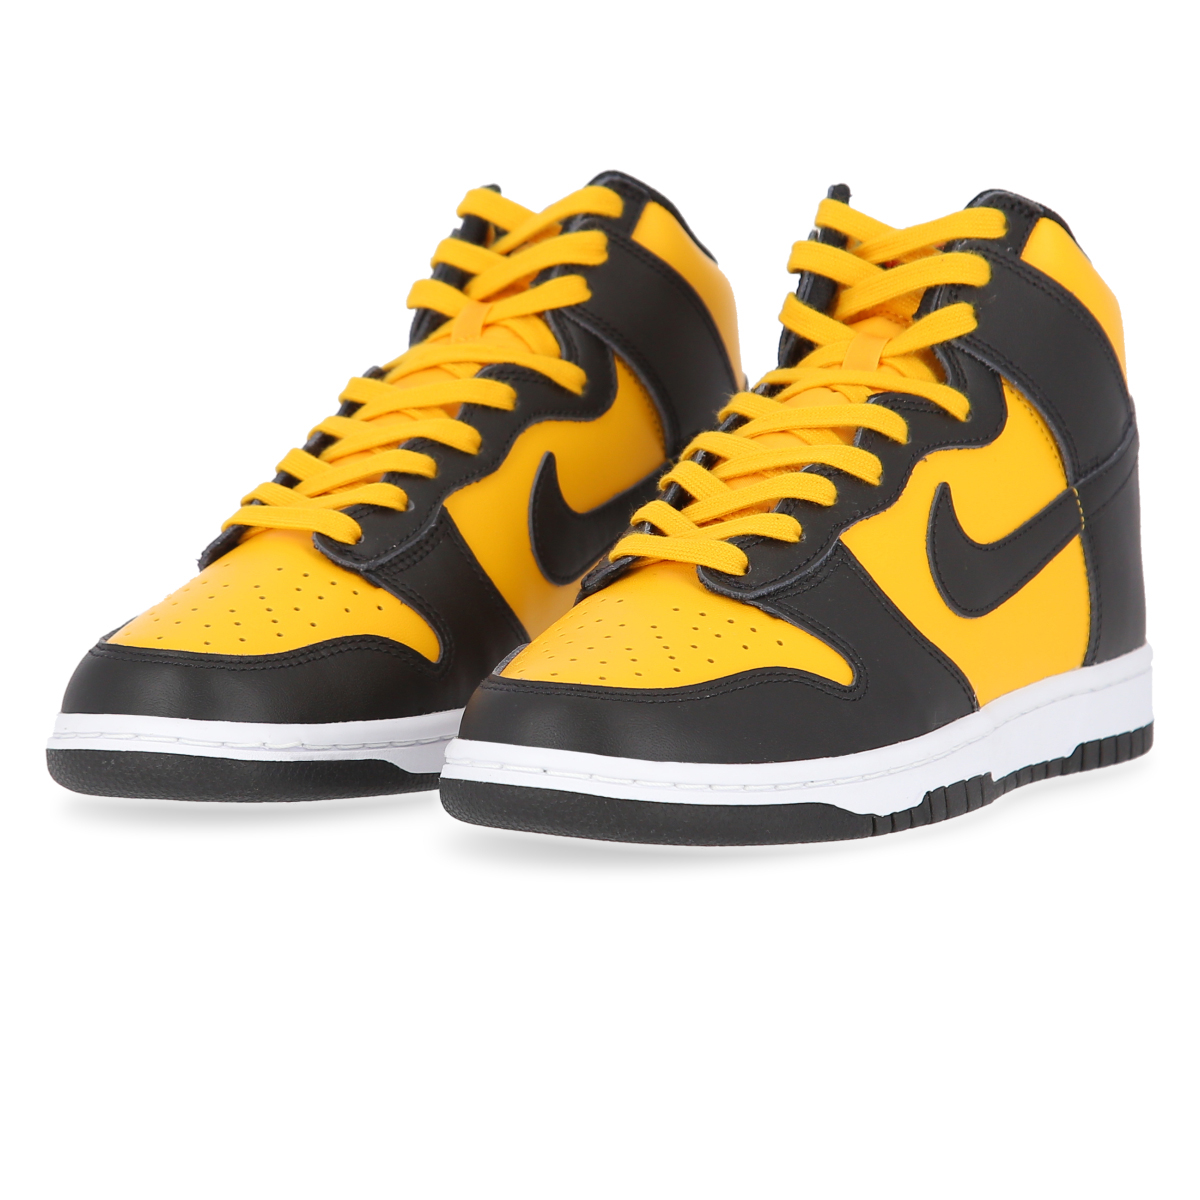 Zapatillas Nike Dunk High Retro Hombre,  image number null